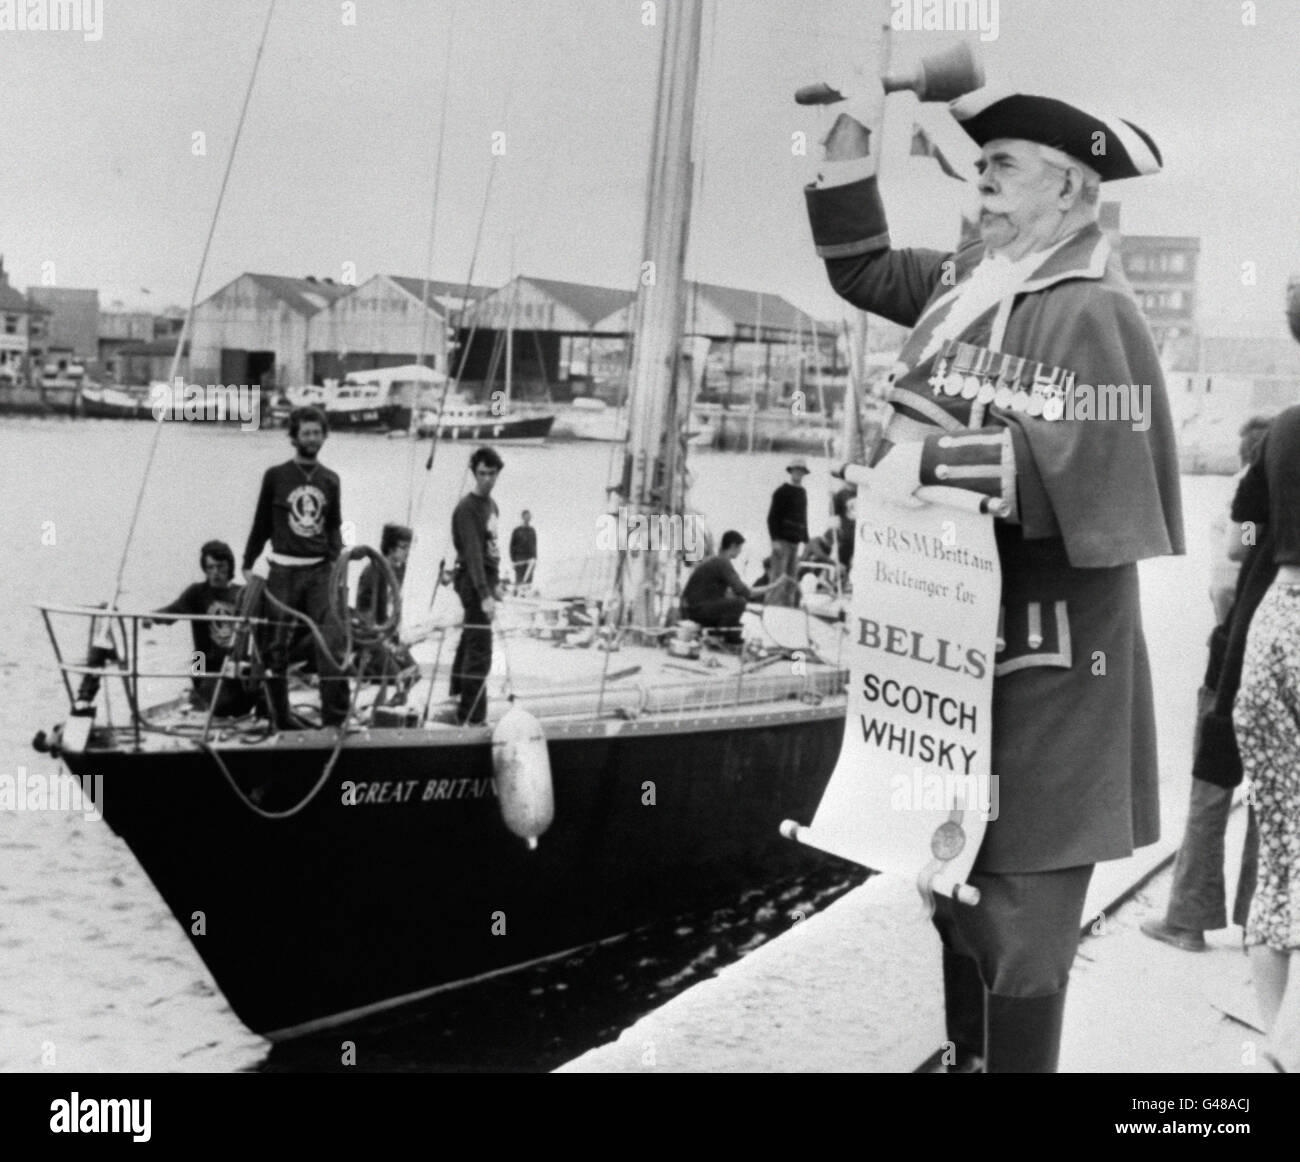 Ex-Regimental Sergeant Major Ronald Brittain greets Great Britain II after the Tall Ships Race Stock Photo